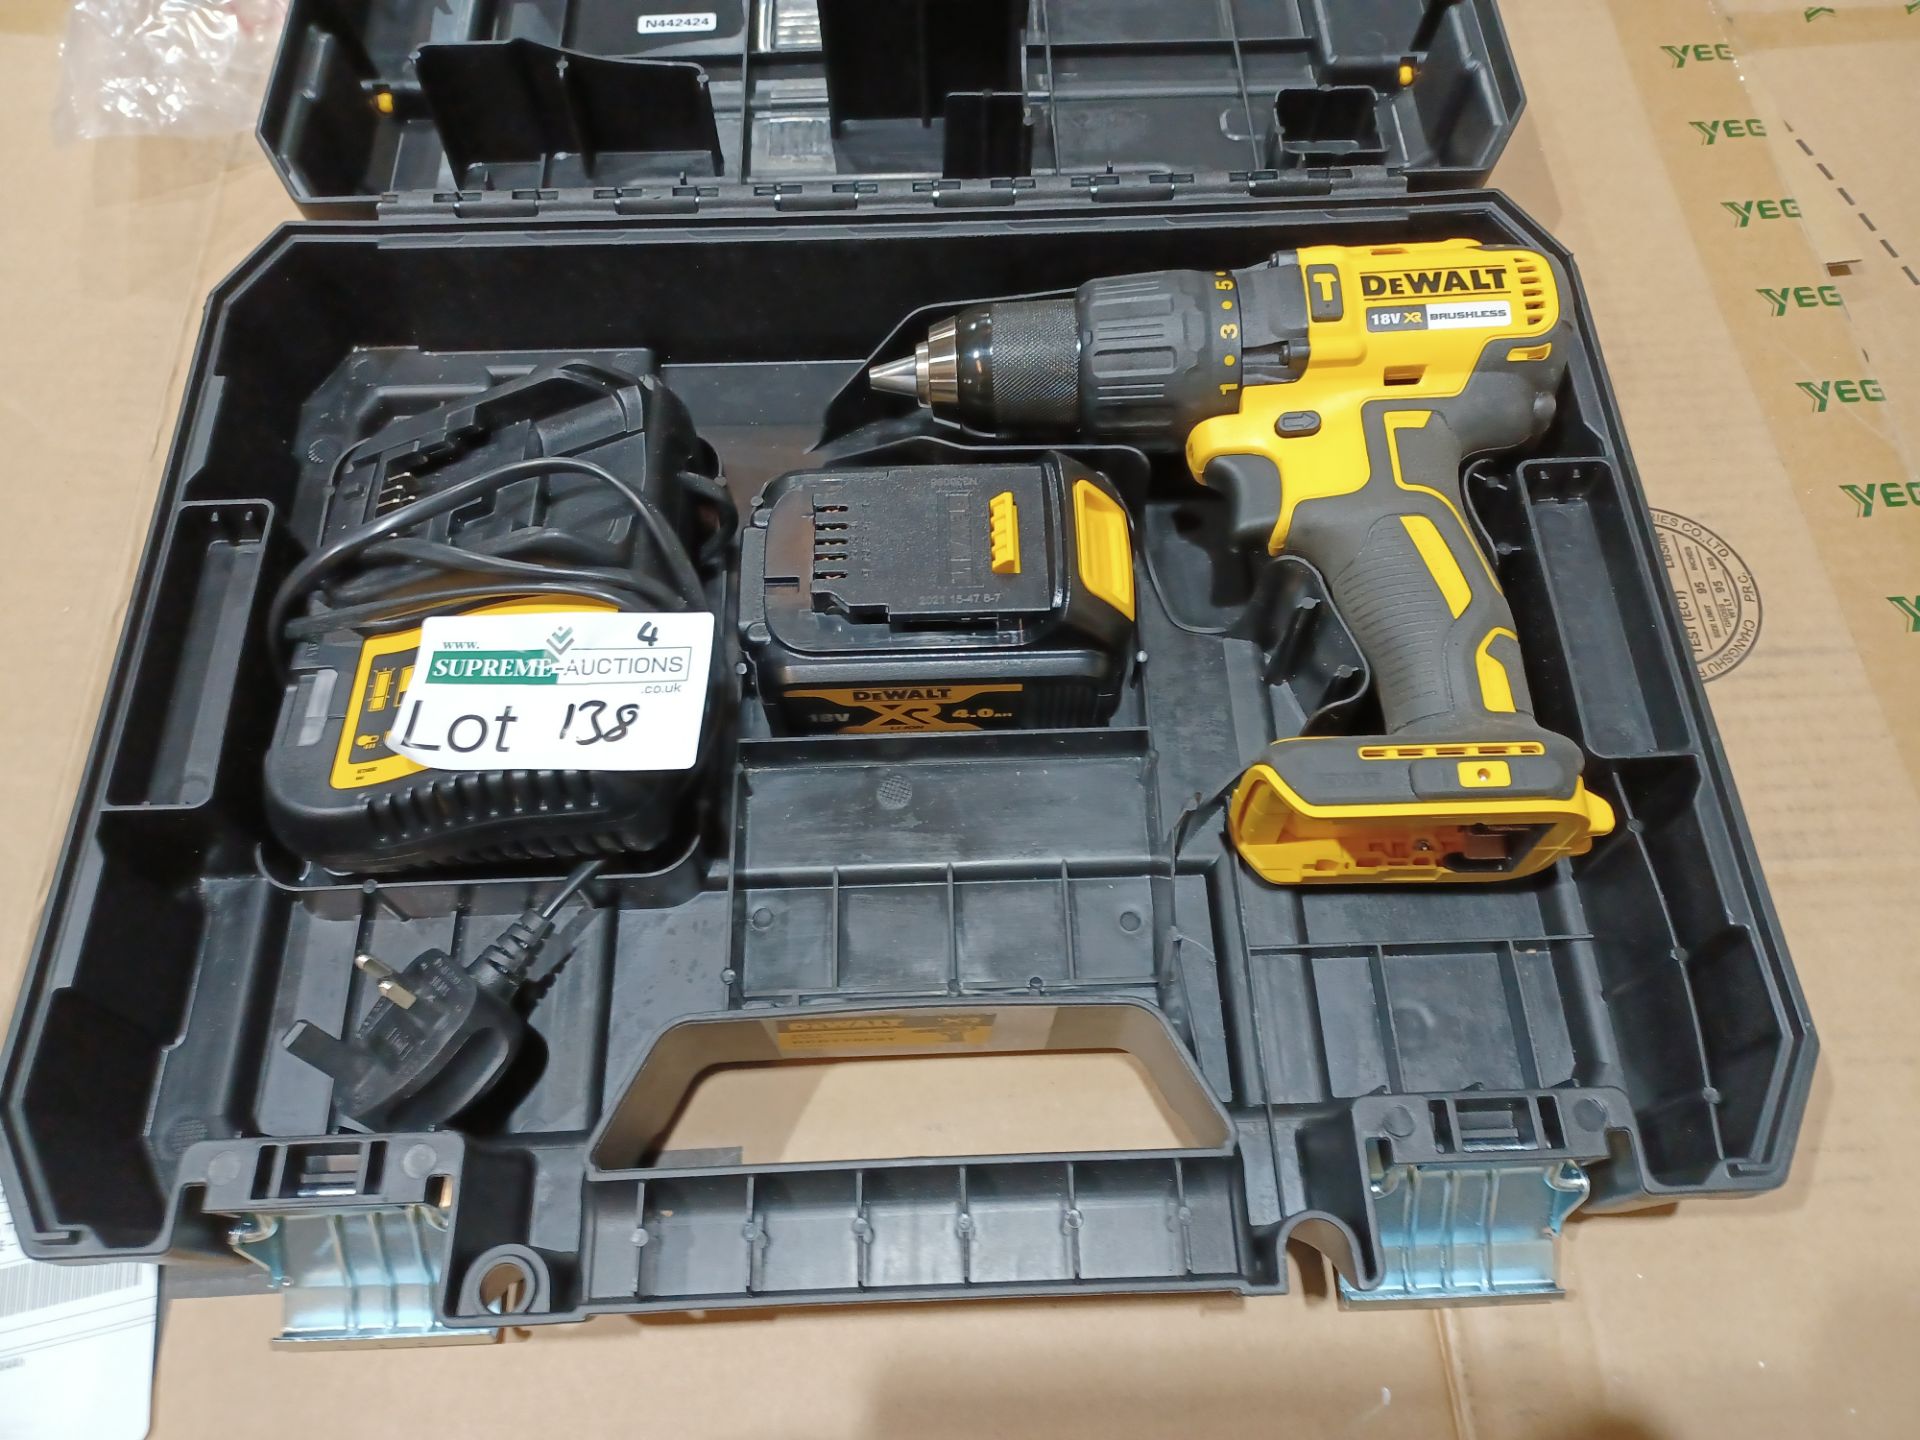 DEWALT DCD778P2T-SFGB 18V 5.0AH LI-ION XR BRUSHLESS CORDLESS COMBI DRILL WITH BATTERY CHARGER